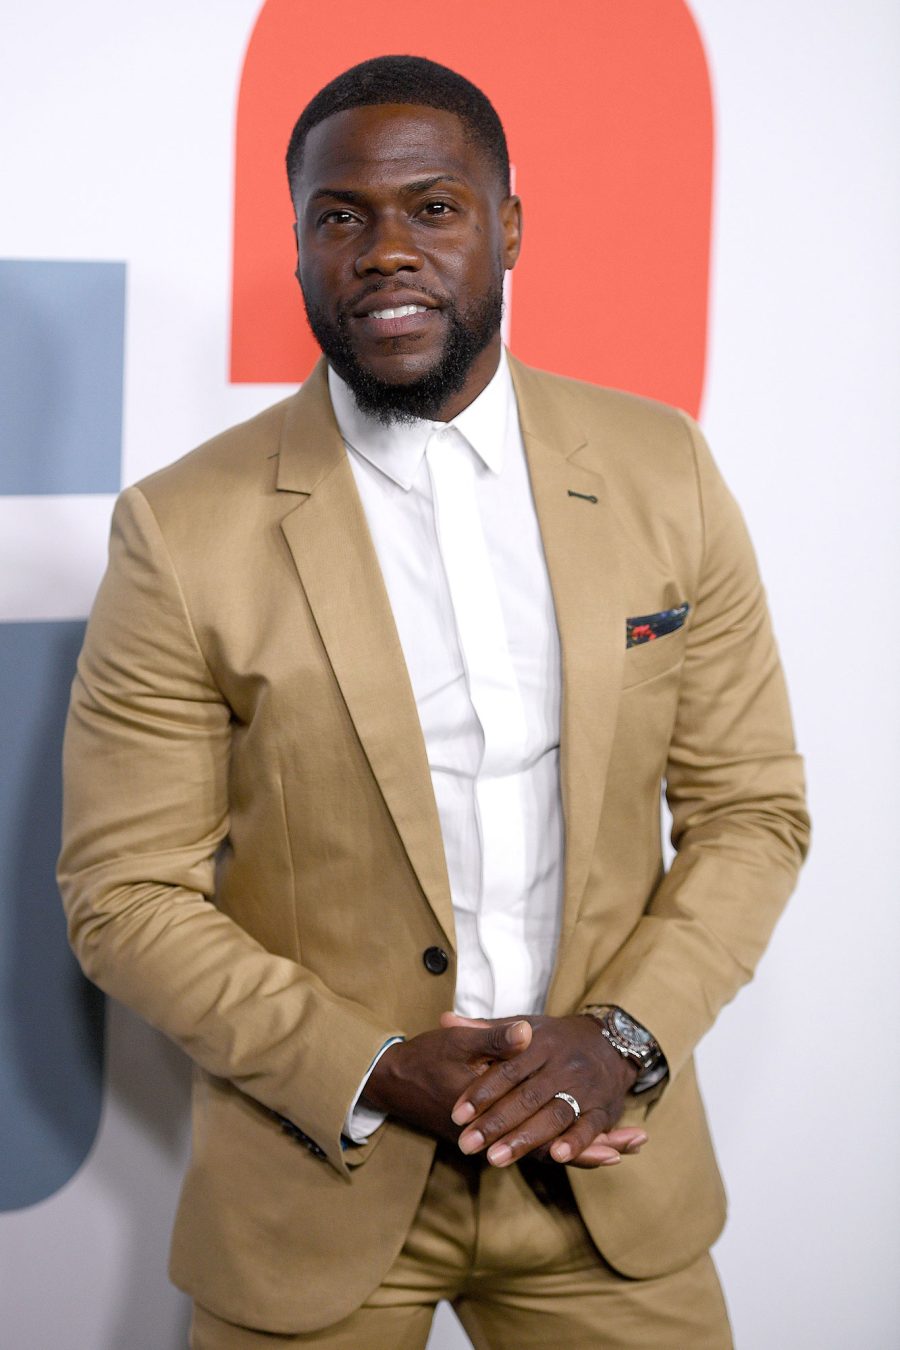 Kevin-Hart-Gallery-Back-Injuries